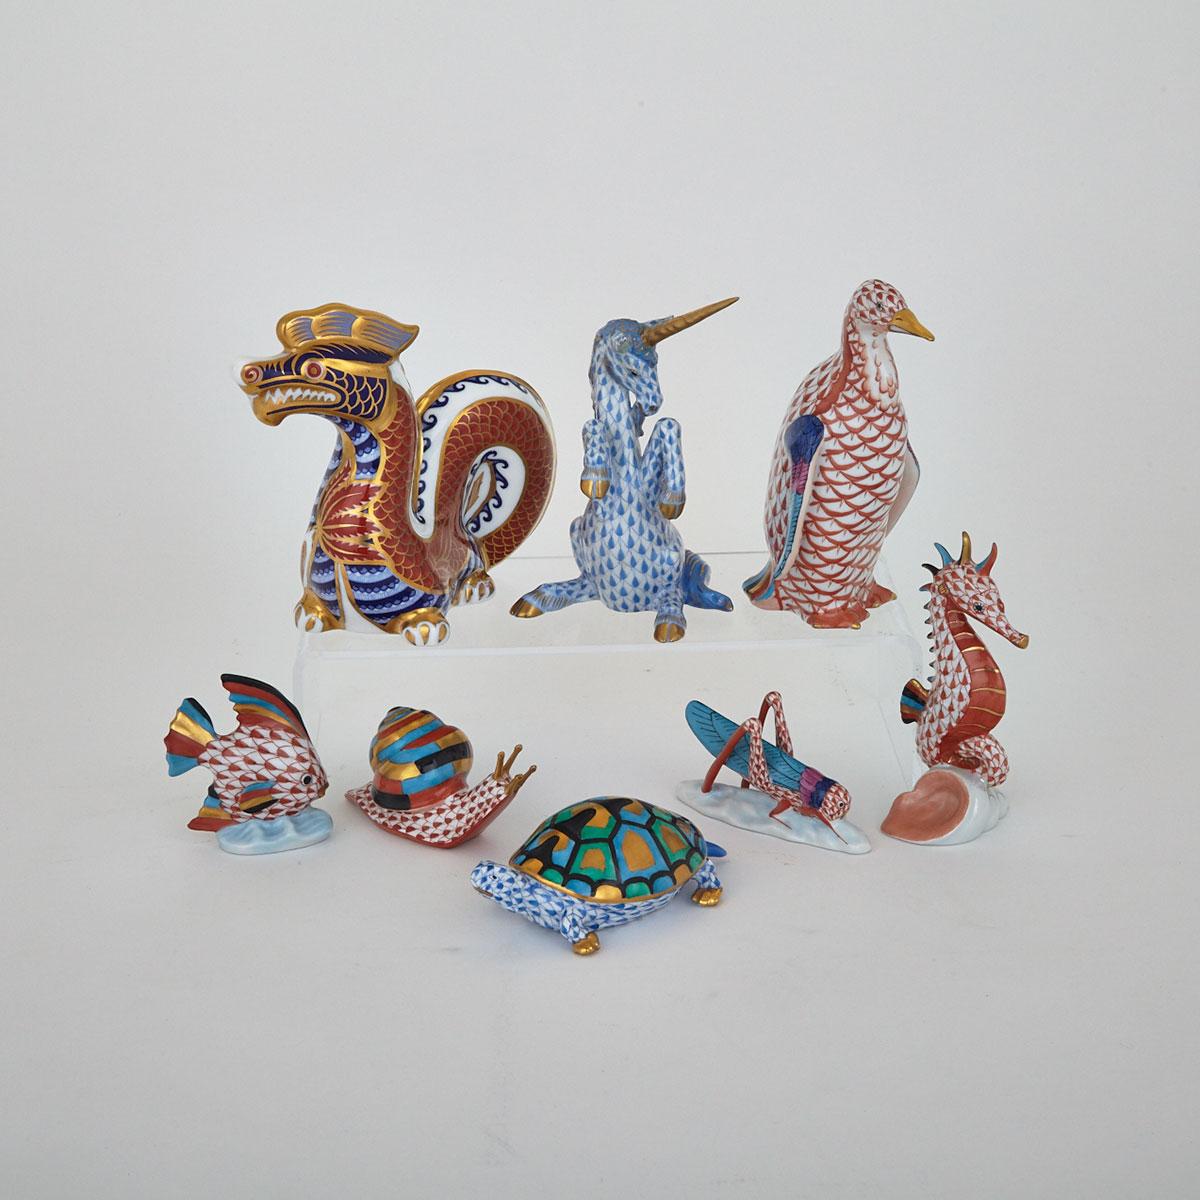 Group of Herend Porcelain Creatures, 20th Century